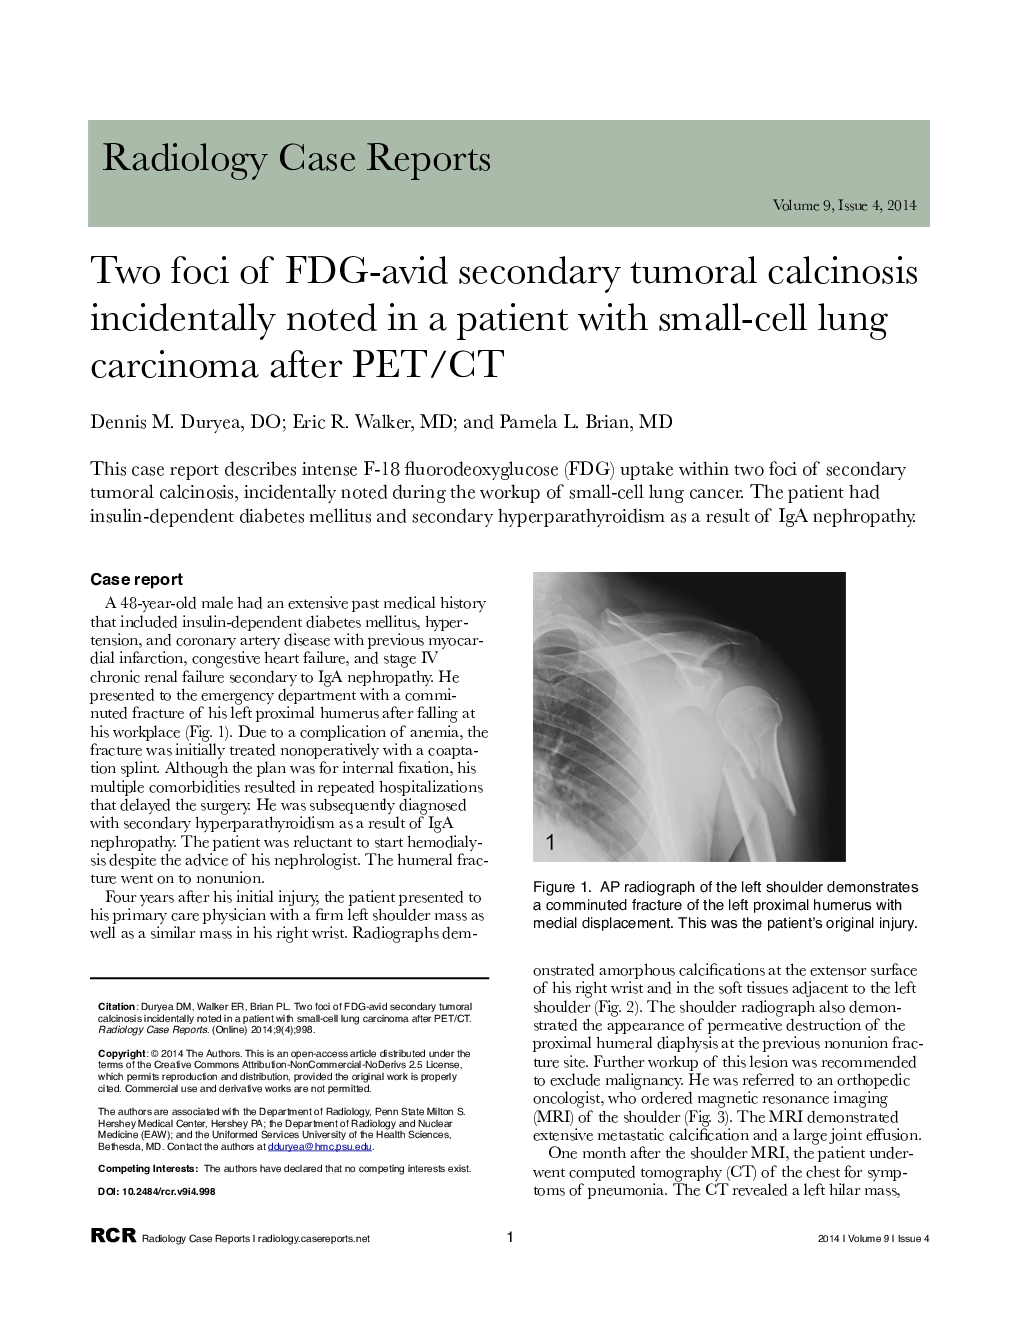 Two foci of FDG-avid secondary tumoral calcinosis incidentally noted in a patient with small-cell lung carcinoma after PET/CT